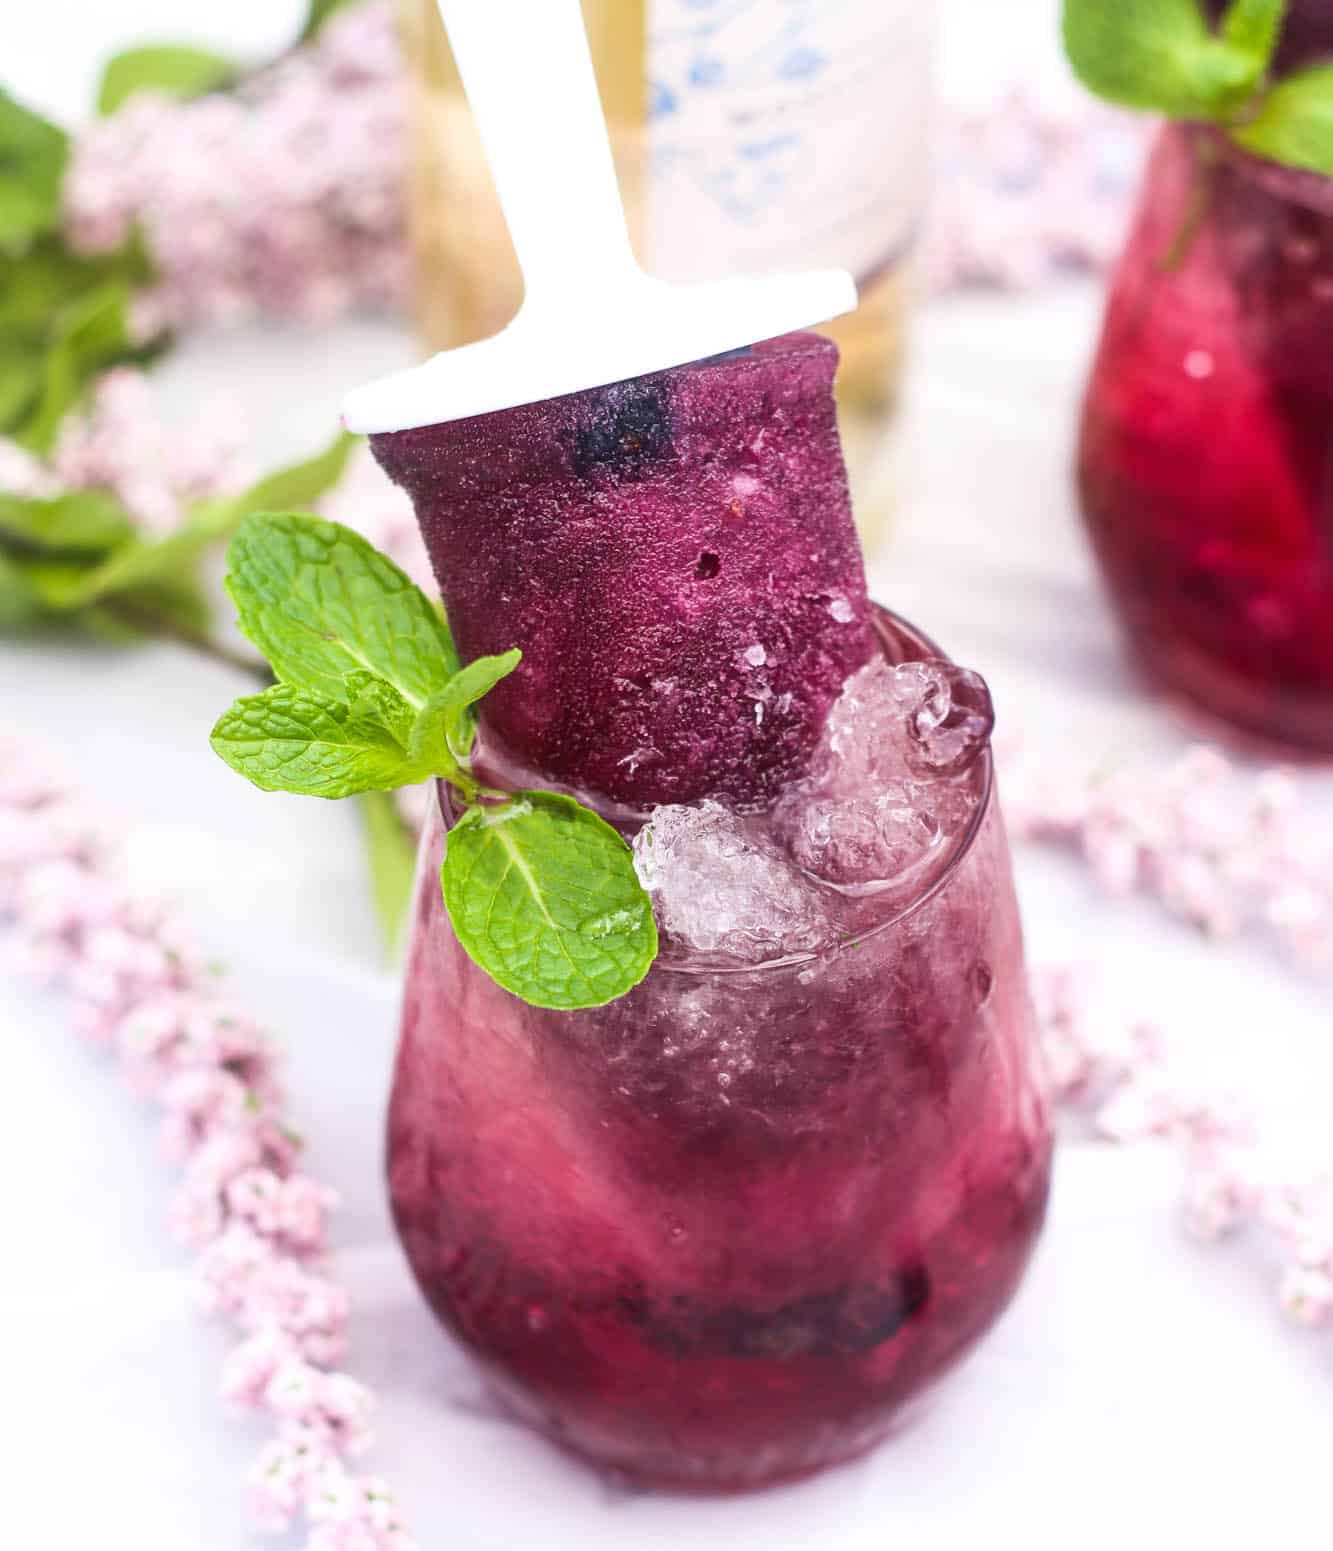 These delicious boozy popsicles will help you cool down this summer! You're going to love the blueberry combined with tasty Moscato wine. So refreshing!